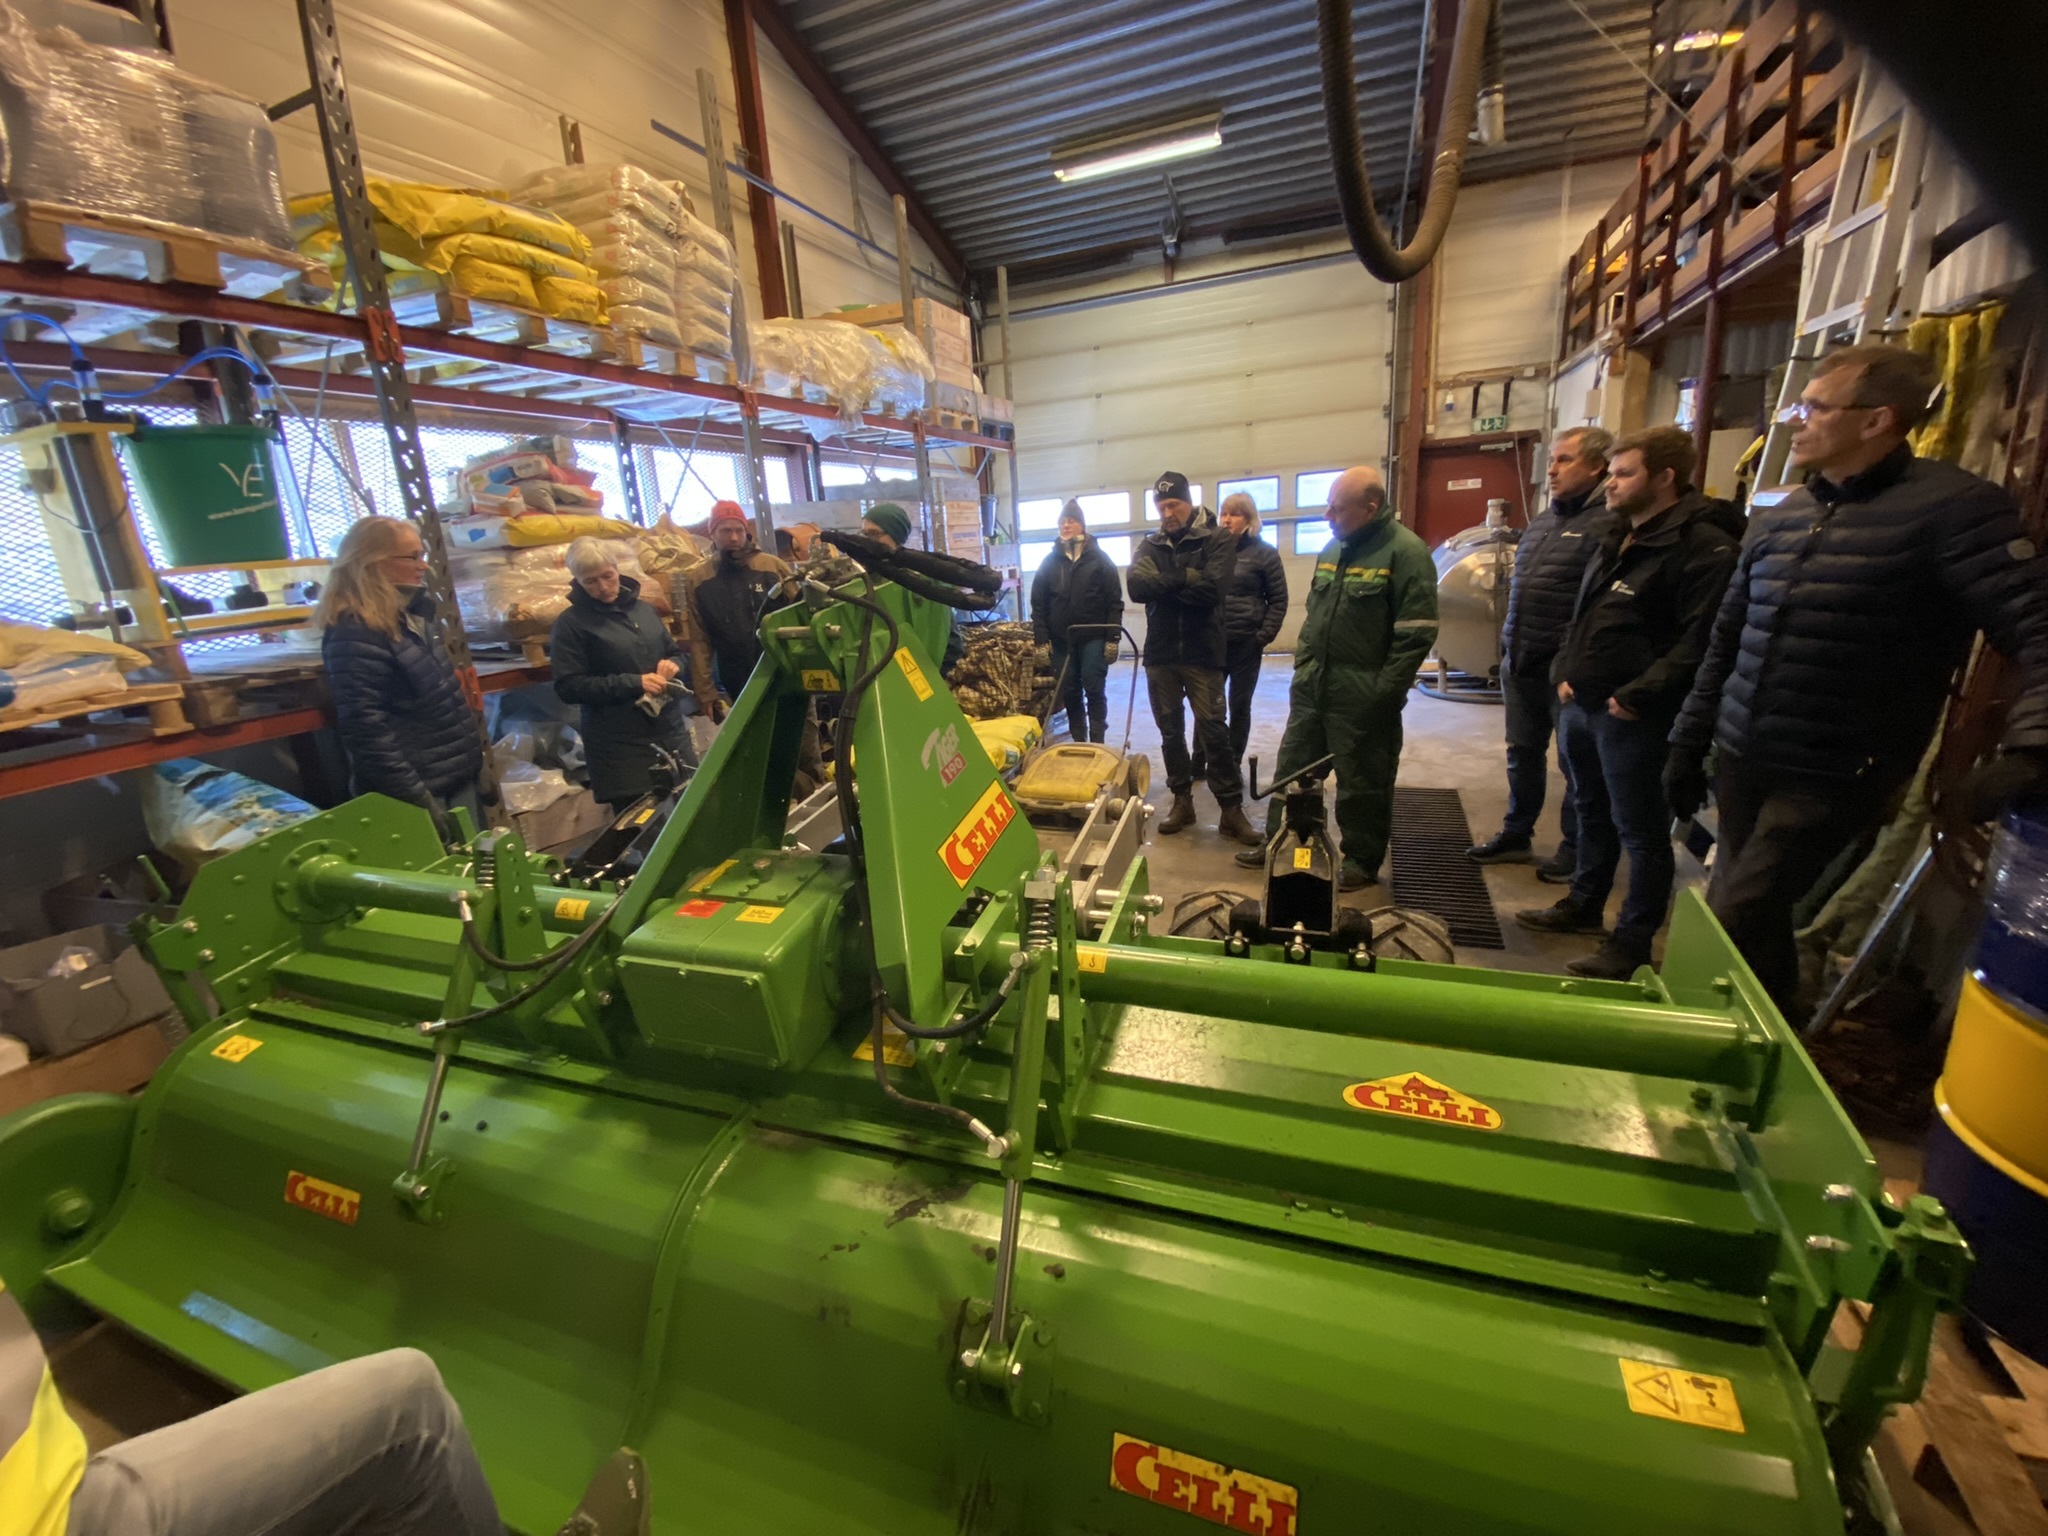 Agricultural secondary schools are very committed to the project. Here, the project group is visiting the farming school at Val (Photo: Sissel Hansen)